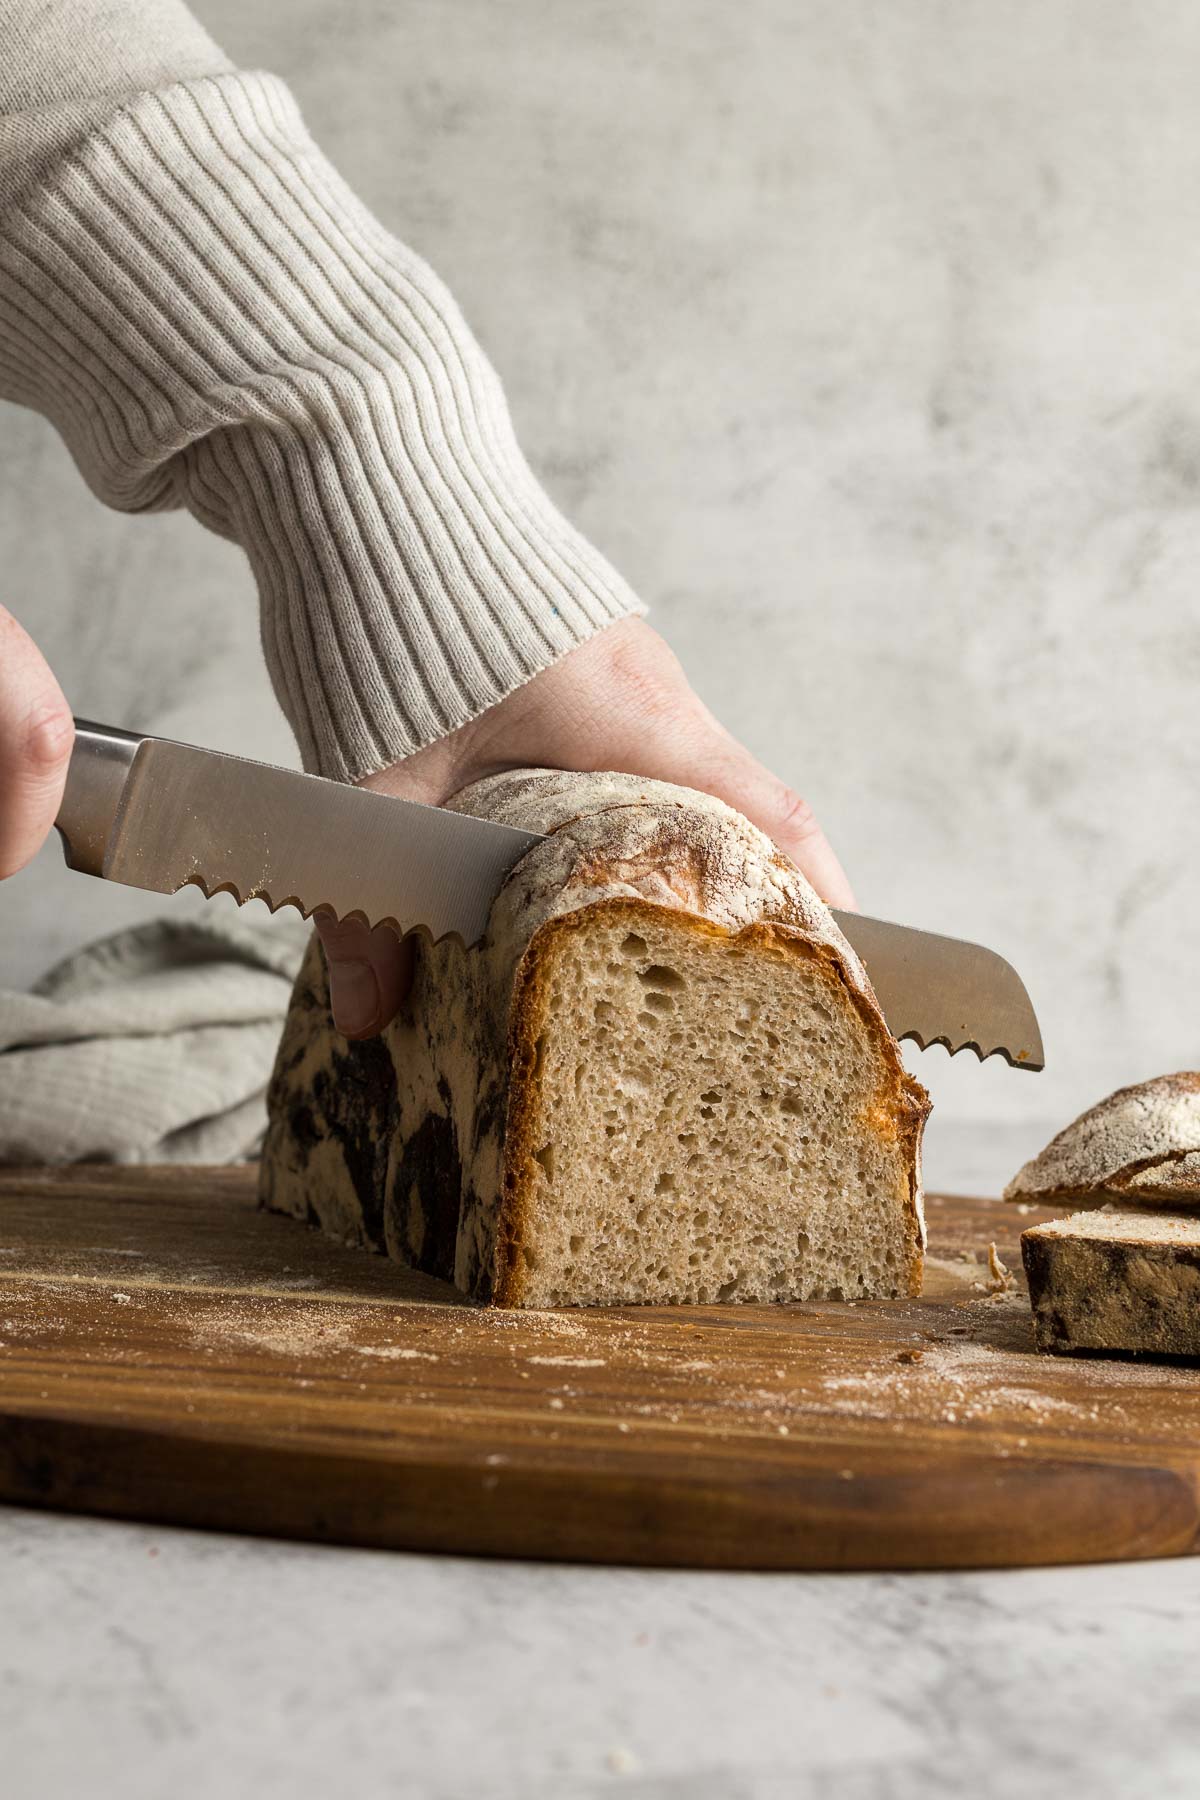 Hand slicing the country loaf with a bread knife.